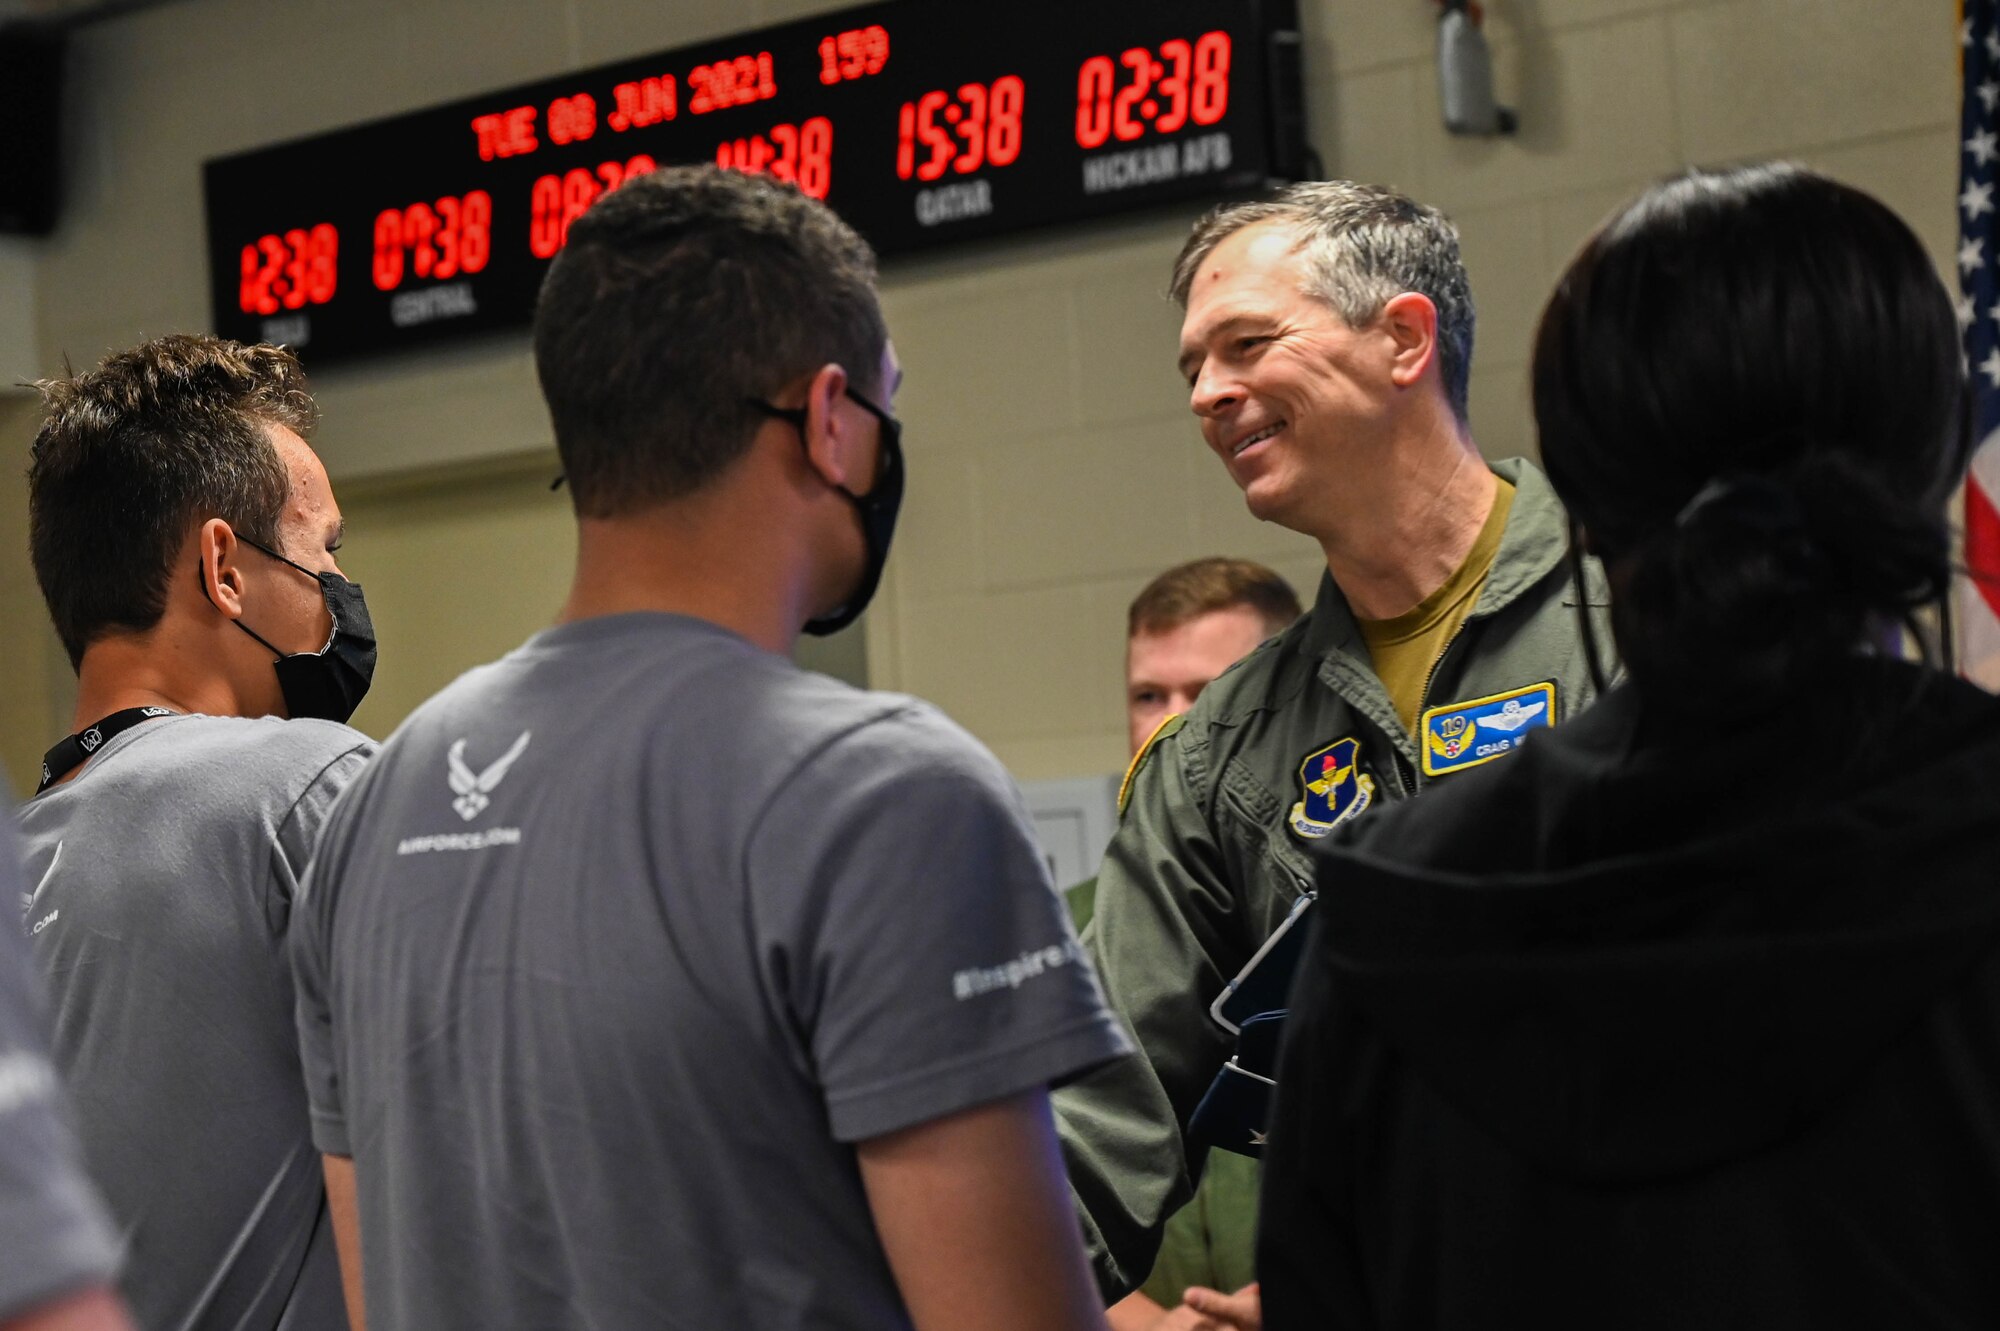 Maj. Gen. Wills and Chief Master Sgt. Rogers visit 33rd Fighter Wing